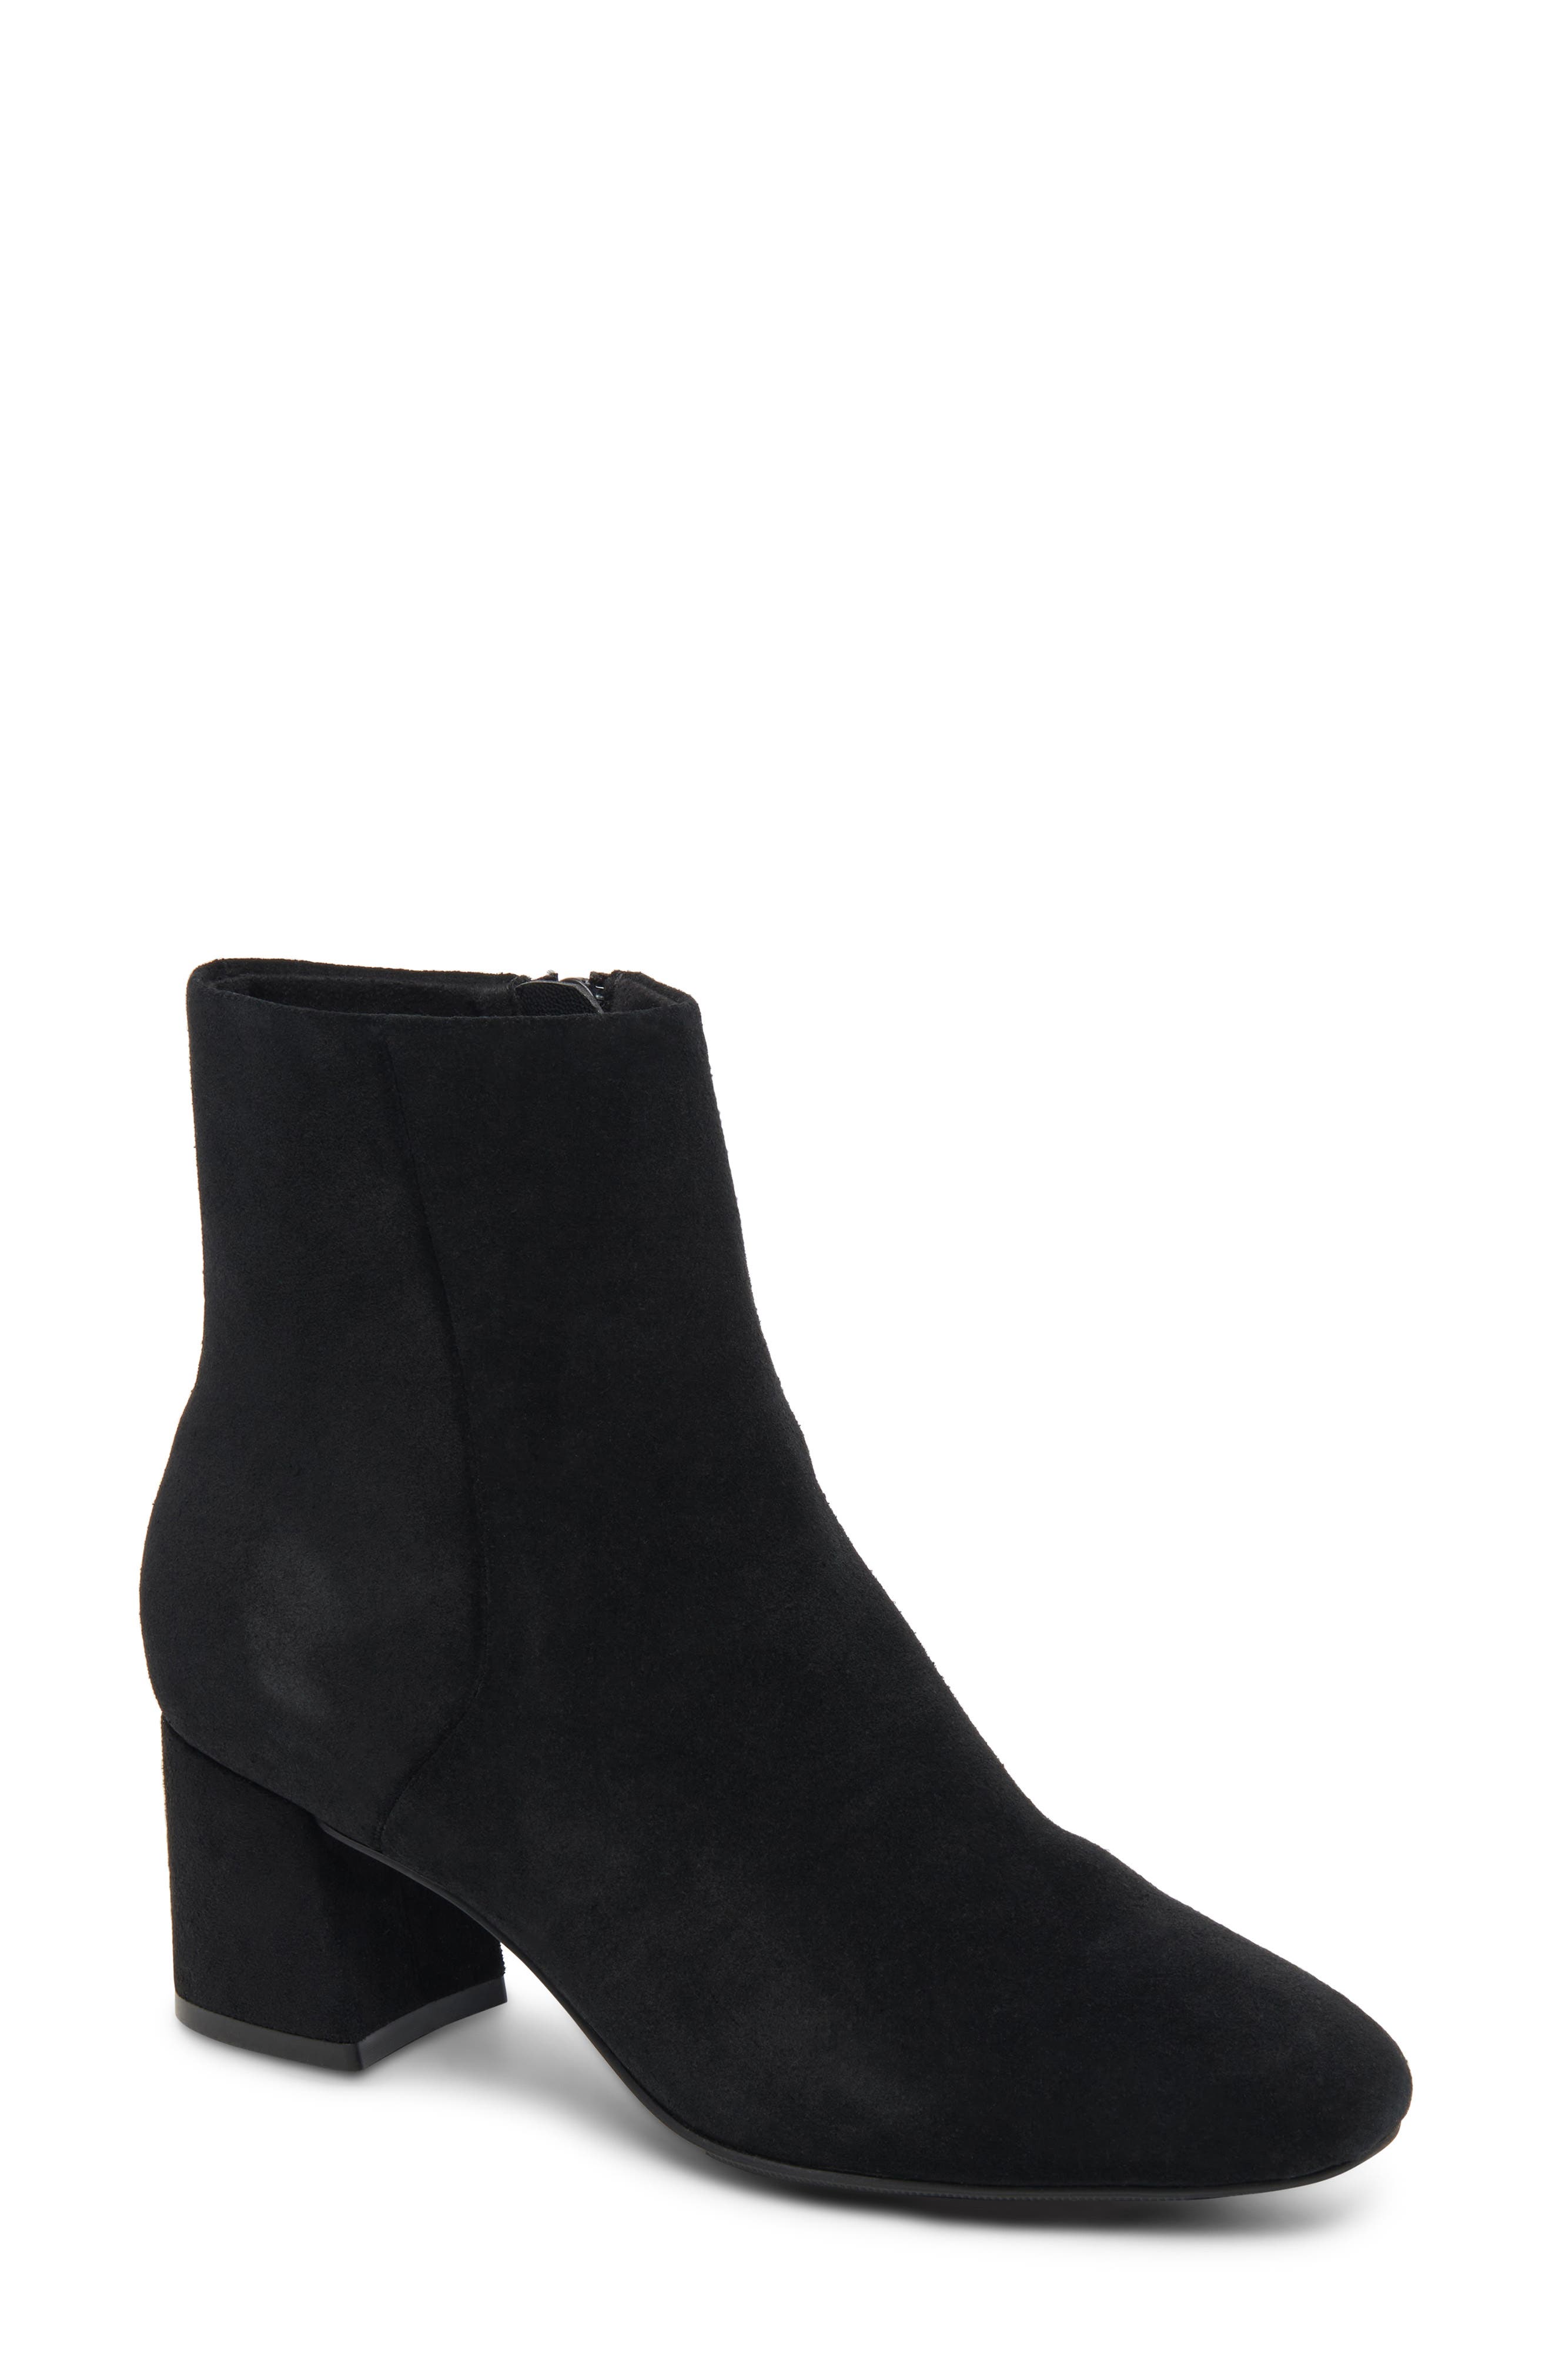 Blondine leather ankle boots